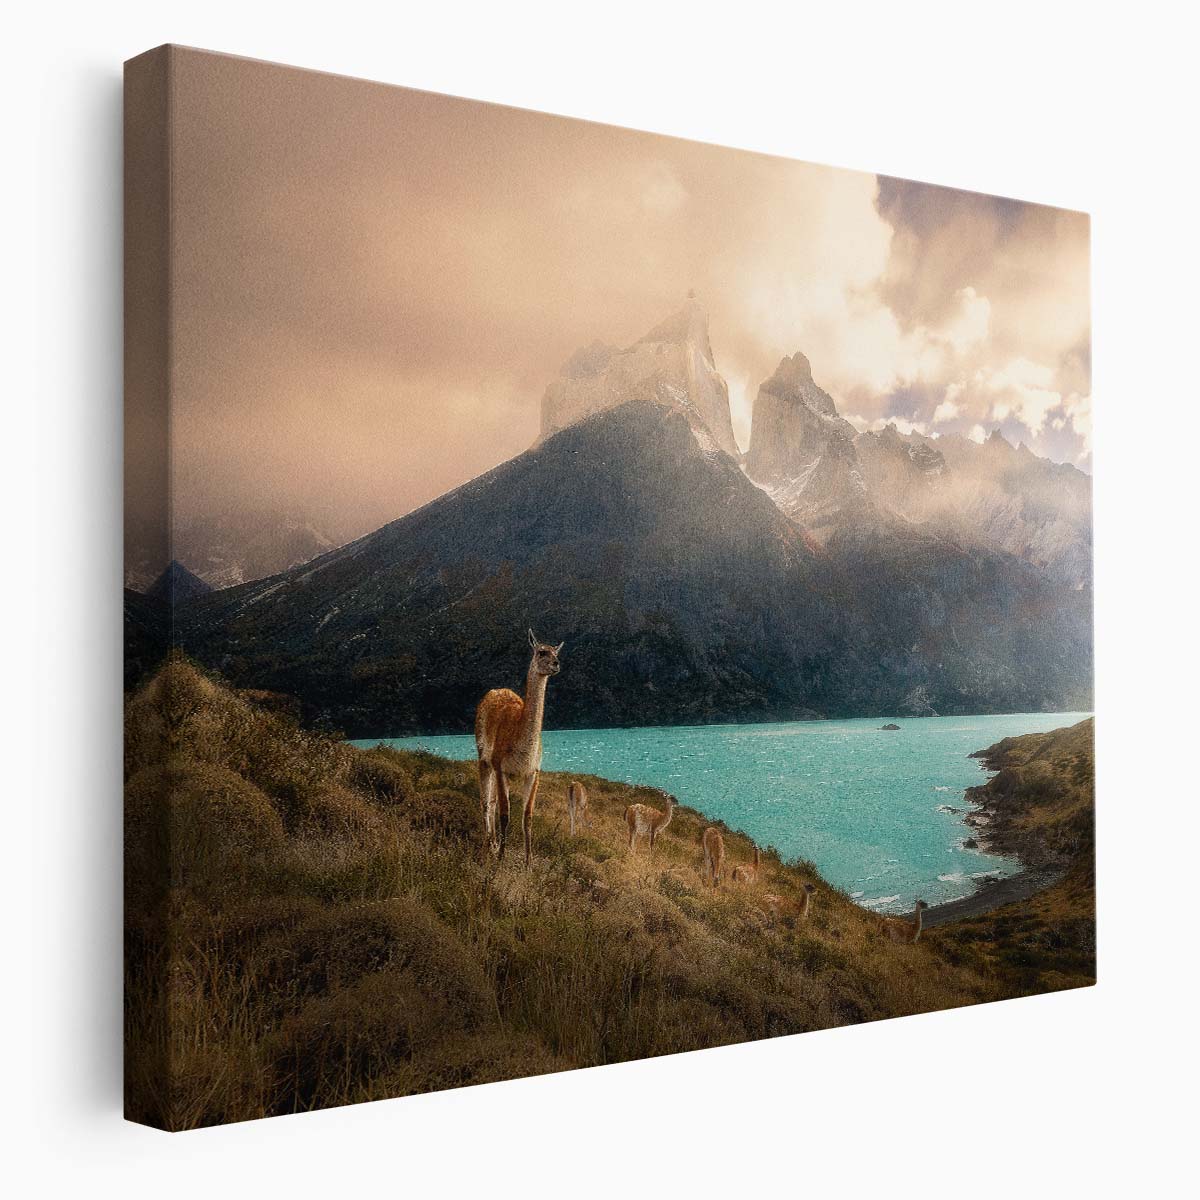 Torres del Paine Alpaca & Mountain Lake Wall Art by Luxuriance Designs. Made in USA.